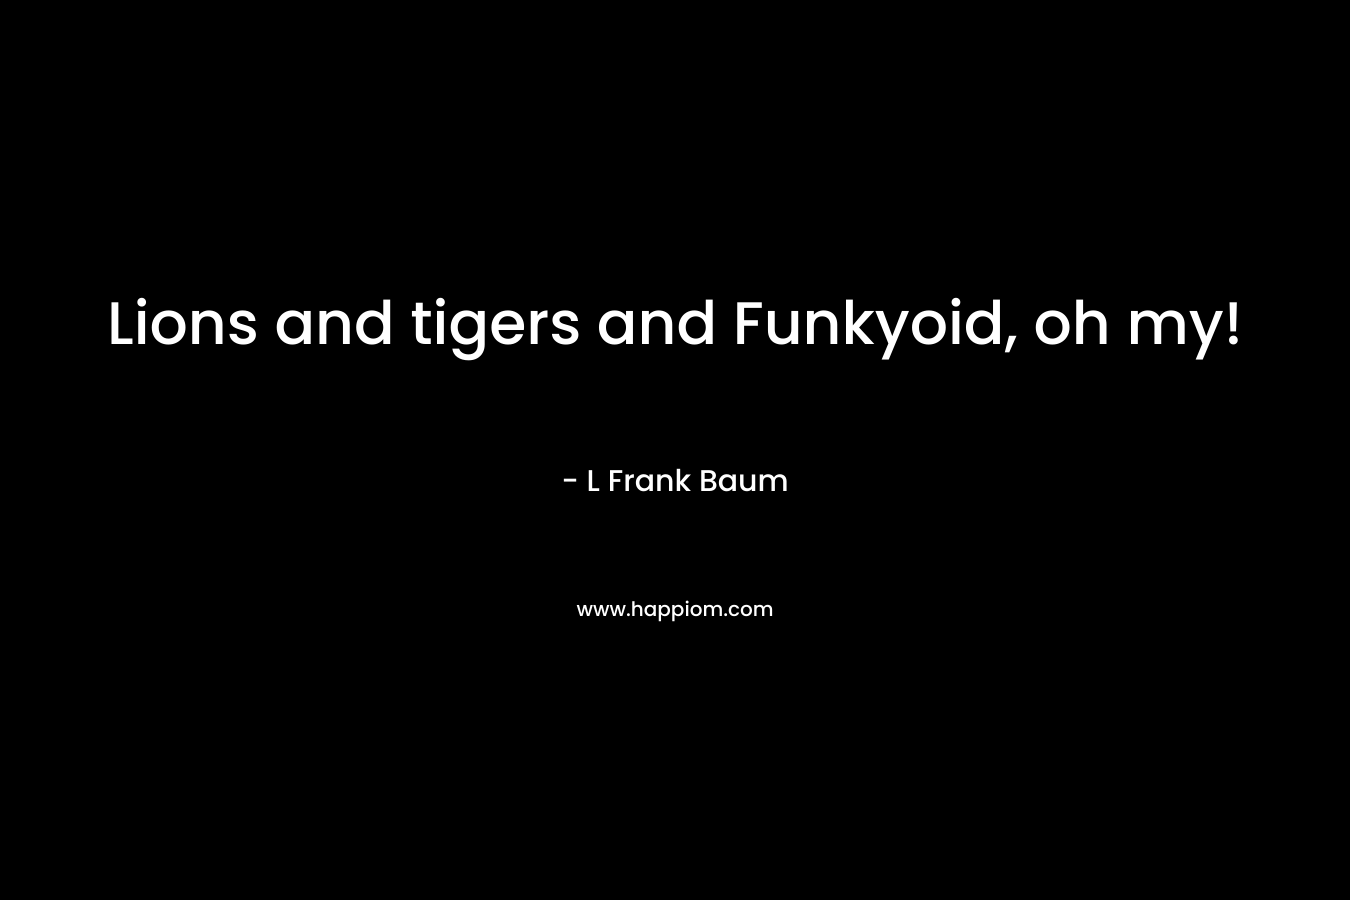 Lions and tigers and Funkyoid, oh my! – L Frank Baum